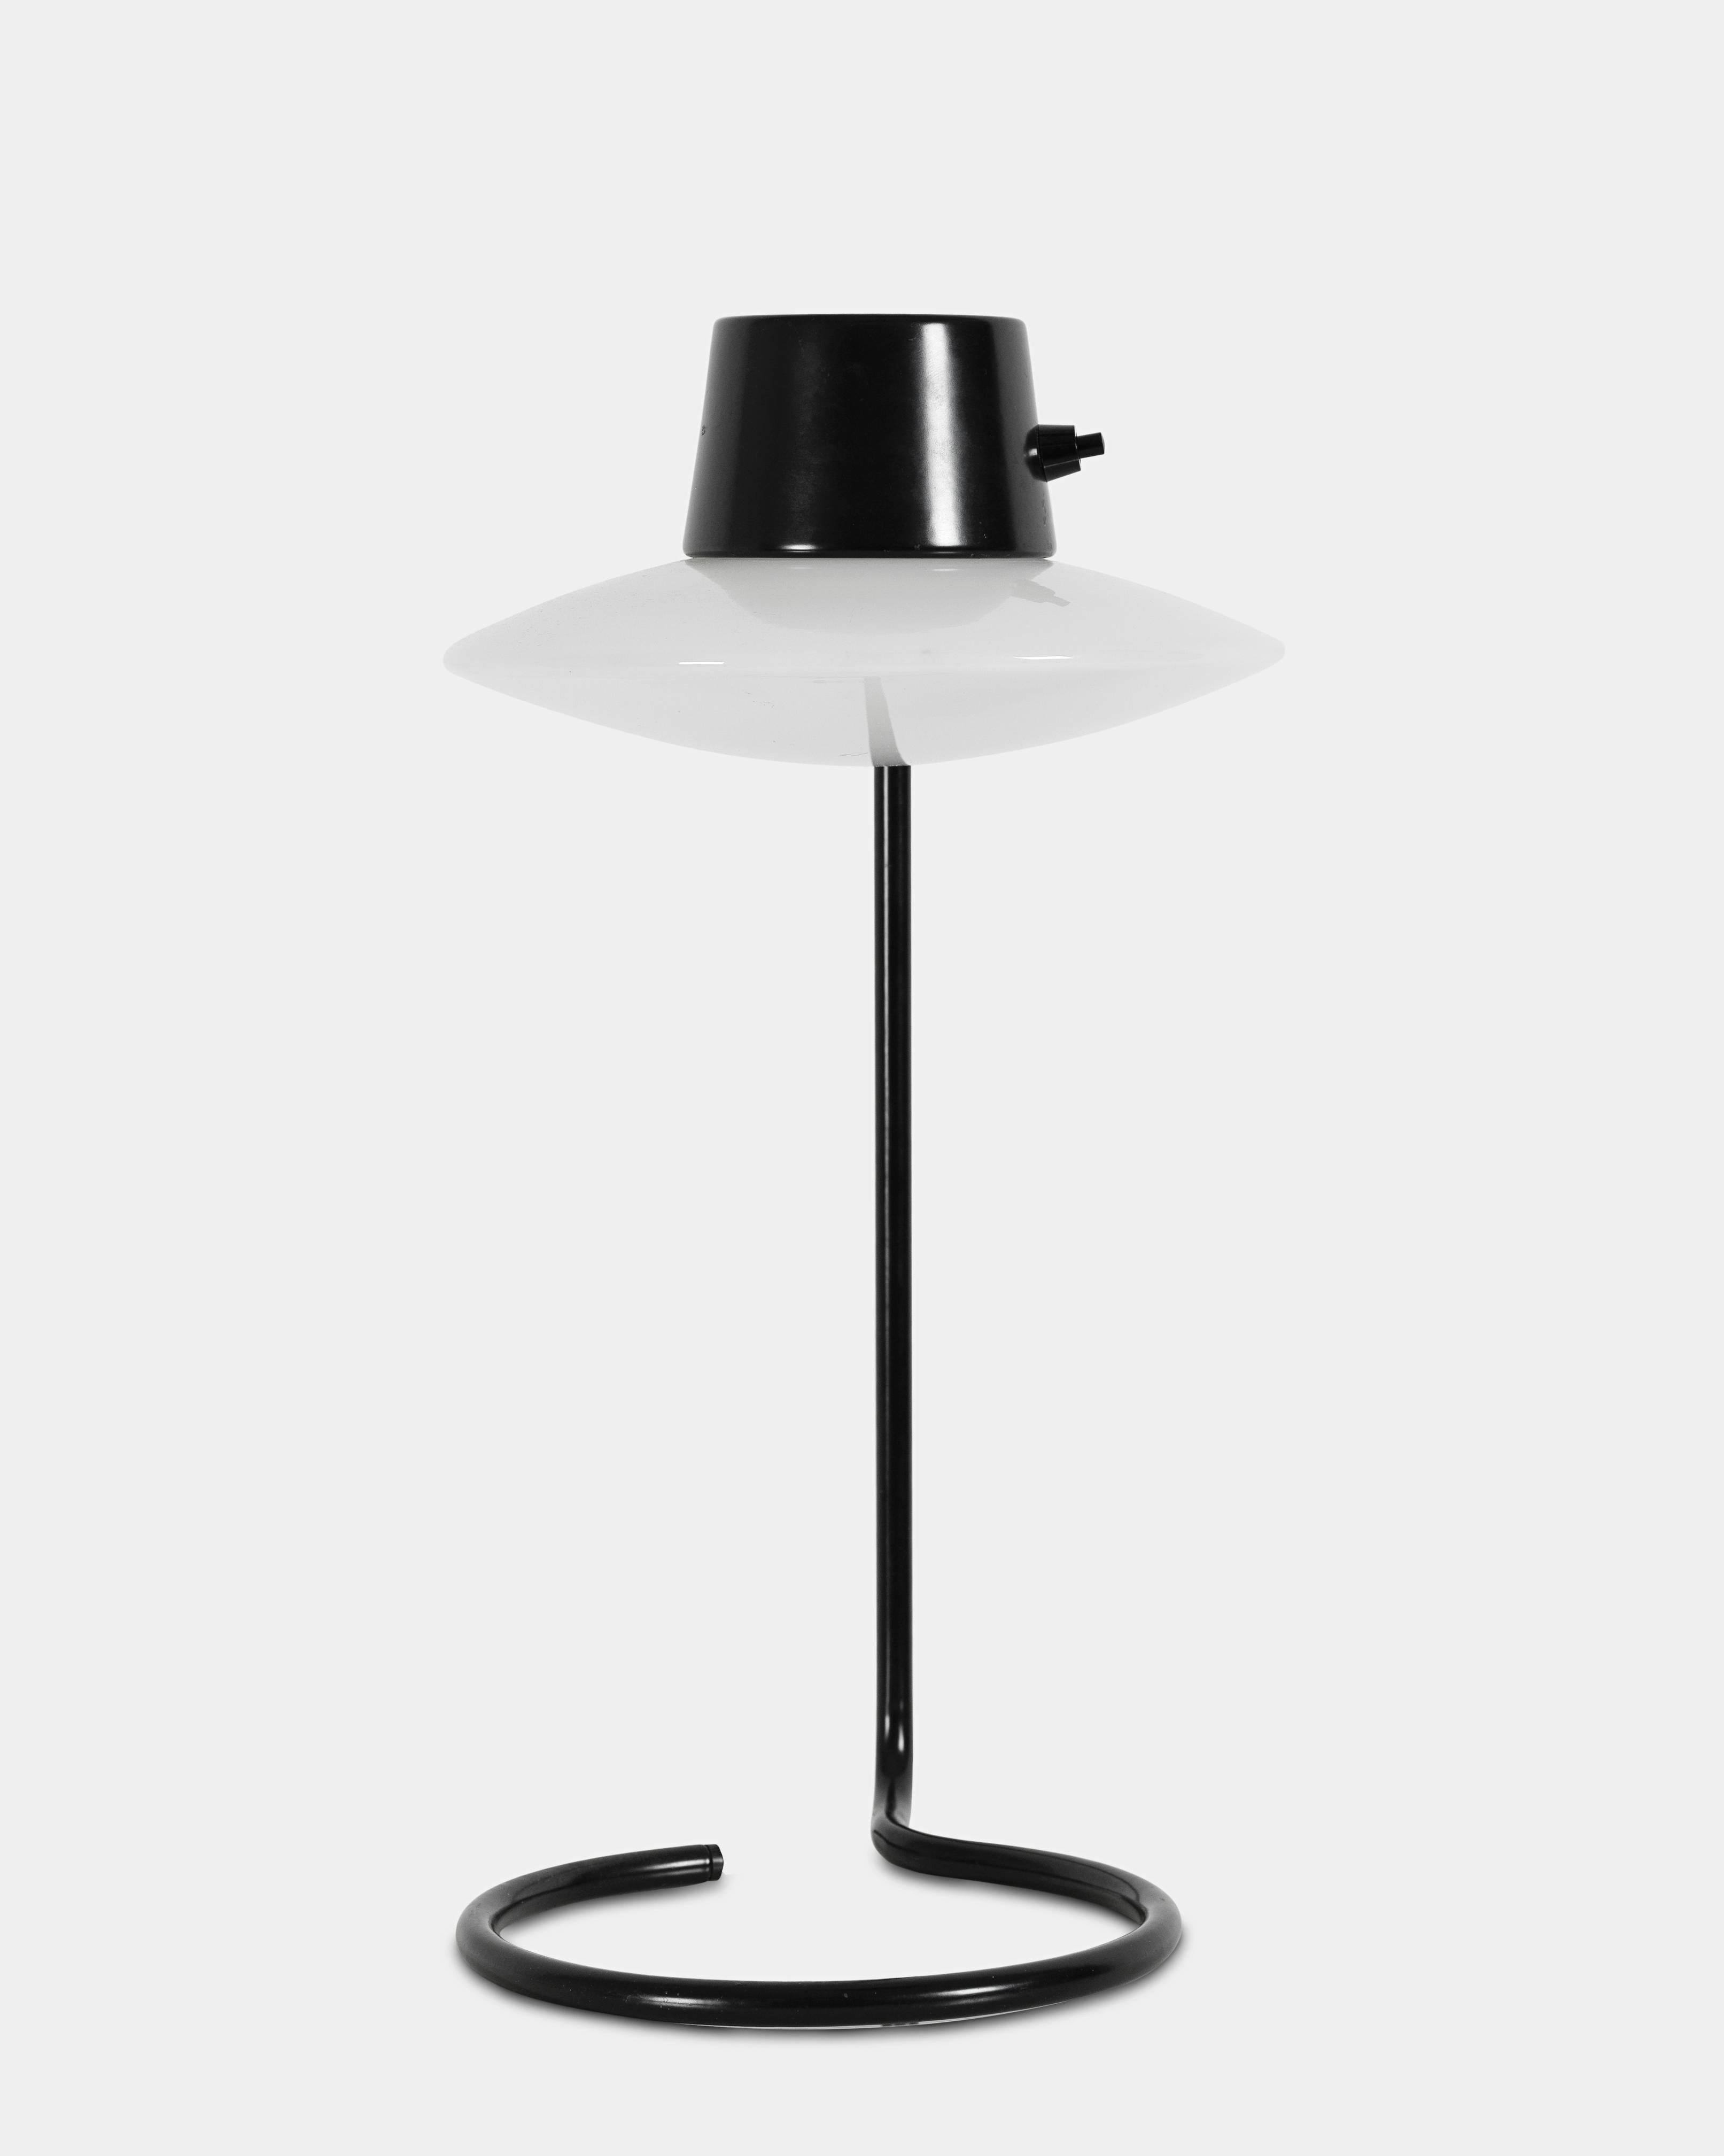 Arne Jacobsen (1902-1971):
Oxford table lamp with frame of black lacquered metal and shade of white opal glass. 
Designed 1962 for St. Catherine's College in Oxford. 
Manufactured by Louis Poulsen.
 